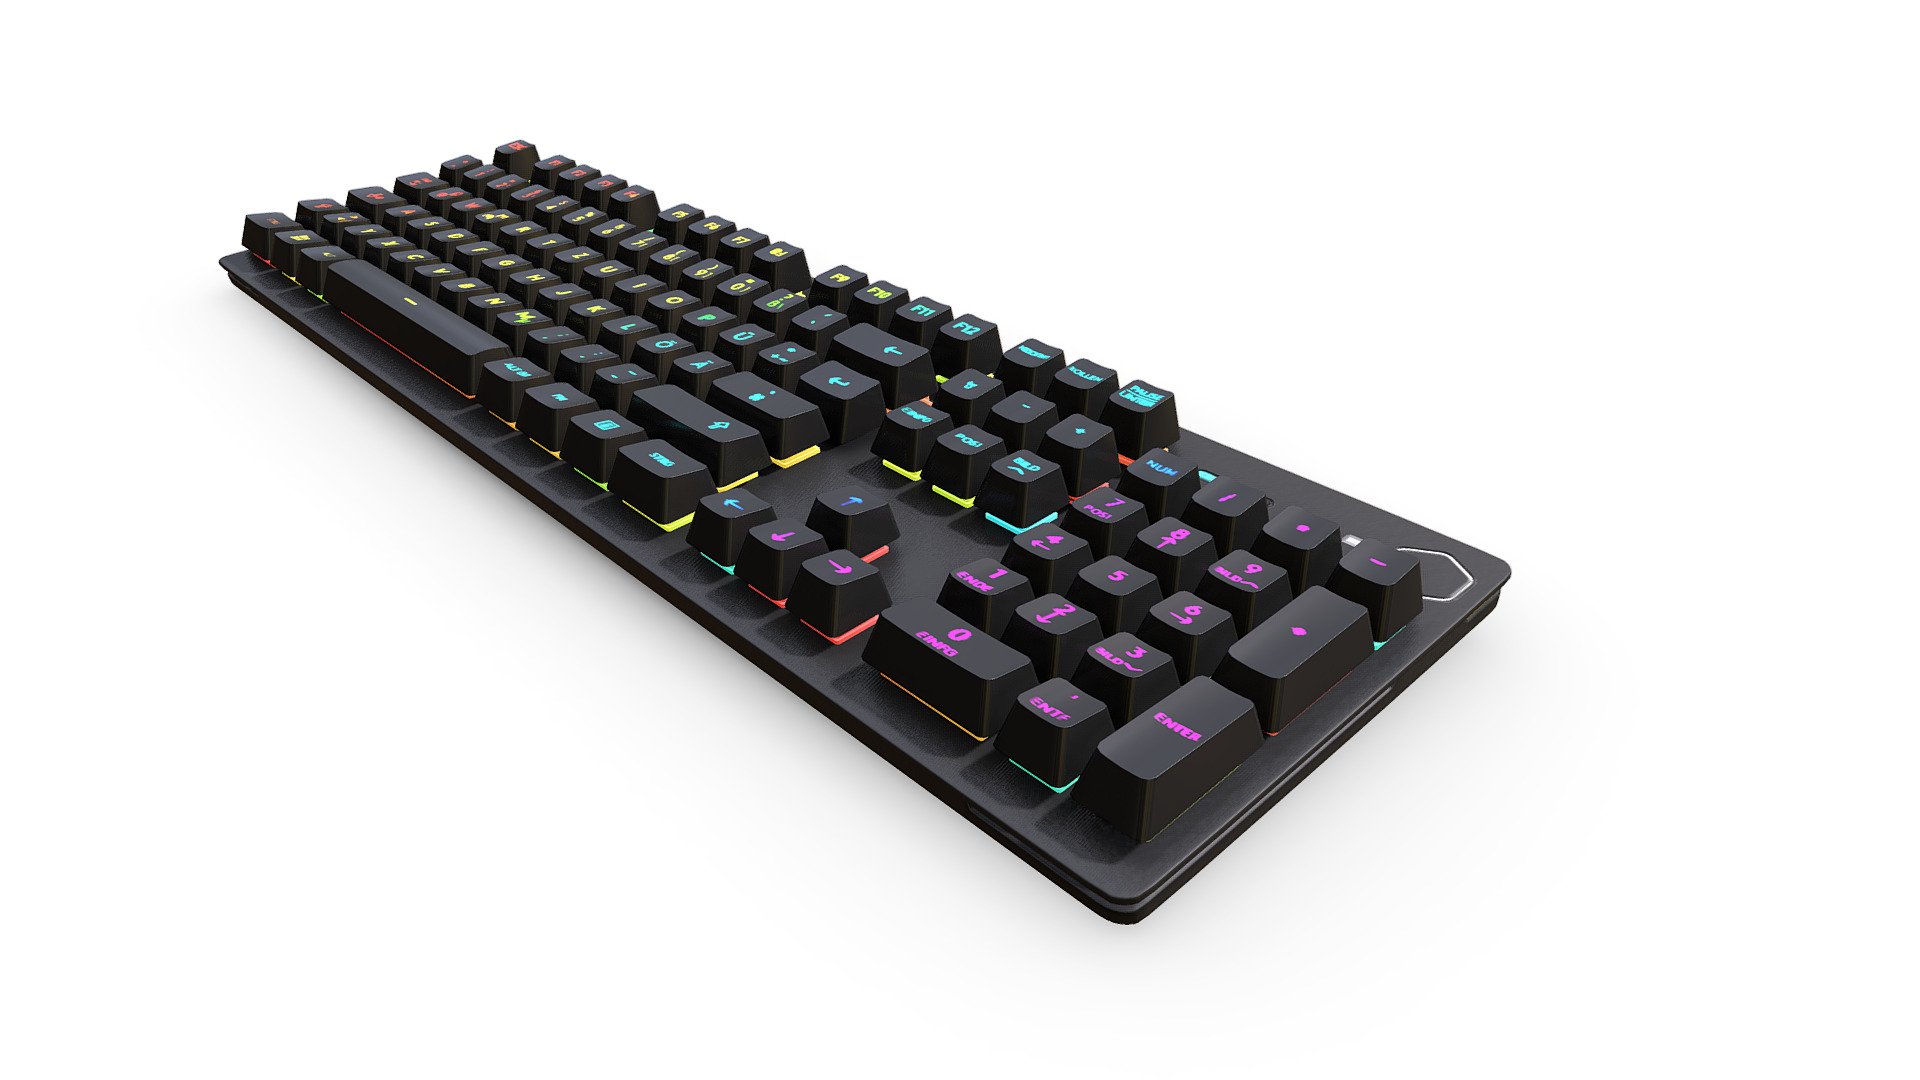 This high-quality 3D model represents the Cooler Master CK352 Gaming Keyboard, a mechanical keyboard designed for gaming enthusiasts. The model accurately depicts the physical design and features of the CK352 keyboard.

The keyboard is designed with a compact and sleek layout, featuring a durable plastic or metal casing for a premium look and feel. The model showcases the individual keys,

The CK352 keyboard utilizes mechanical key switches, providing tactile feedback and improved responsiveness for gamers. 

Whether you need it for gaming product showcases, e-sports events, or any other creative project, this 3D model of the Cooler Master CK352 Gaming Keyboard will help you accurately visualize and showcase the keyboard in a virtual environment.

Note: Please remember to respect intellectual property rights and ensure you have the necessary permissions to use and distribute any 3D models or designs based on copyrighted brands or products 3d model